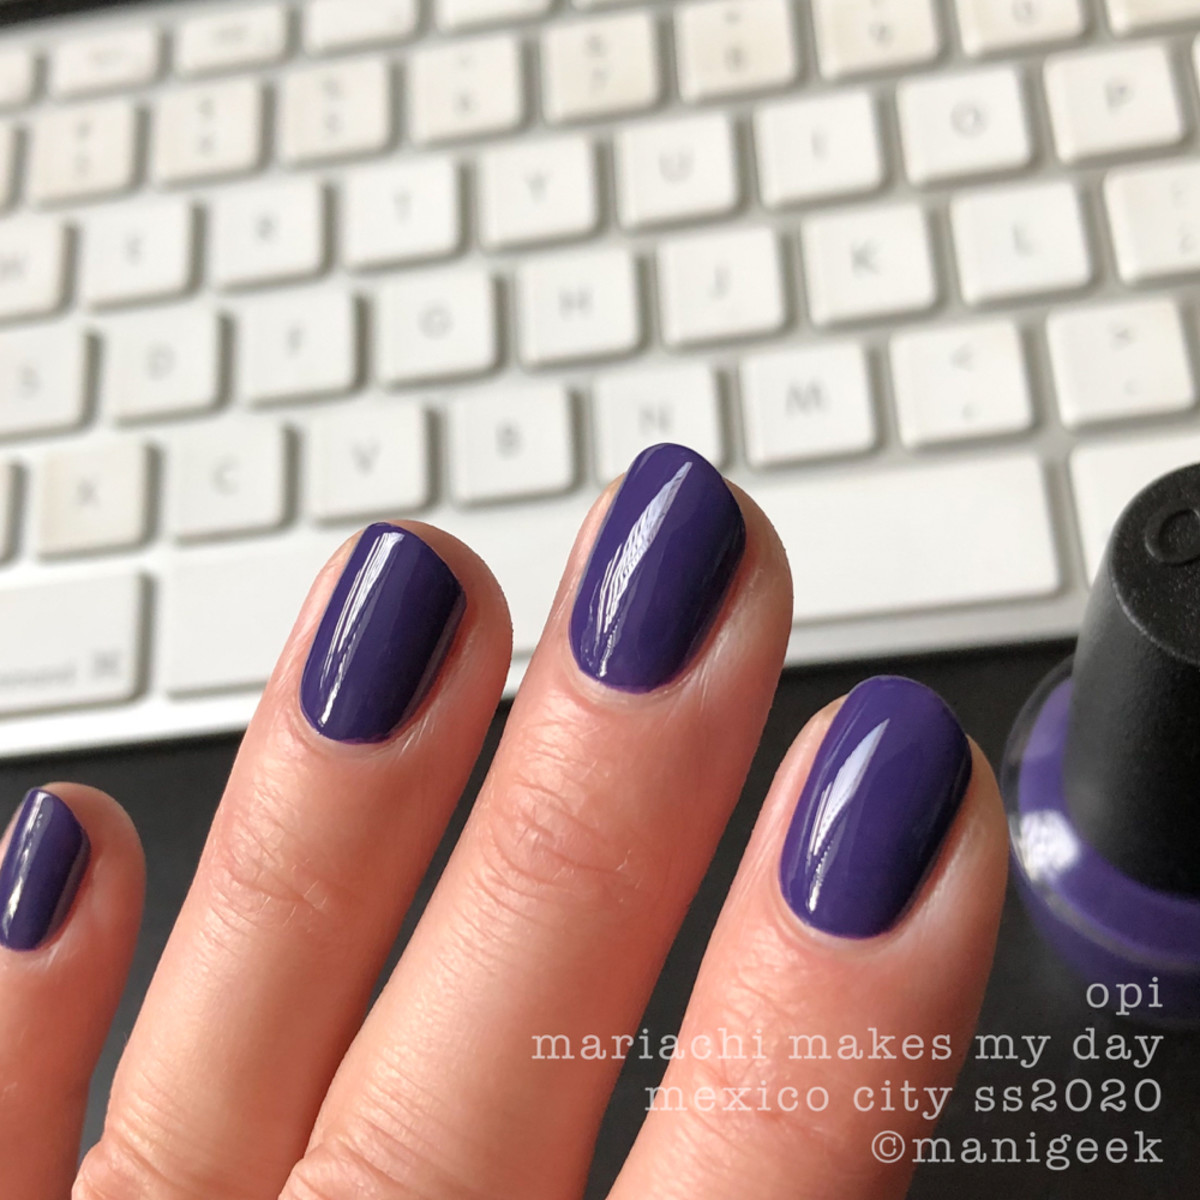 OPI Mariachi Makes My Day - OPI Mexico City Swatches Review 2020